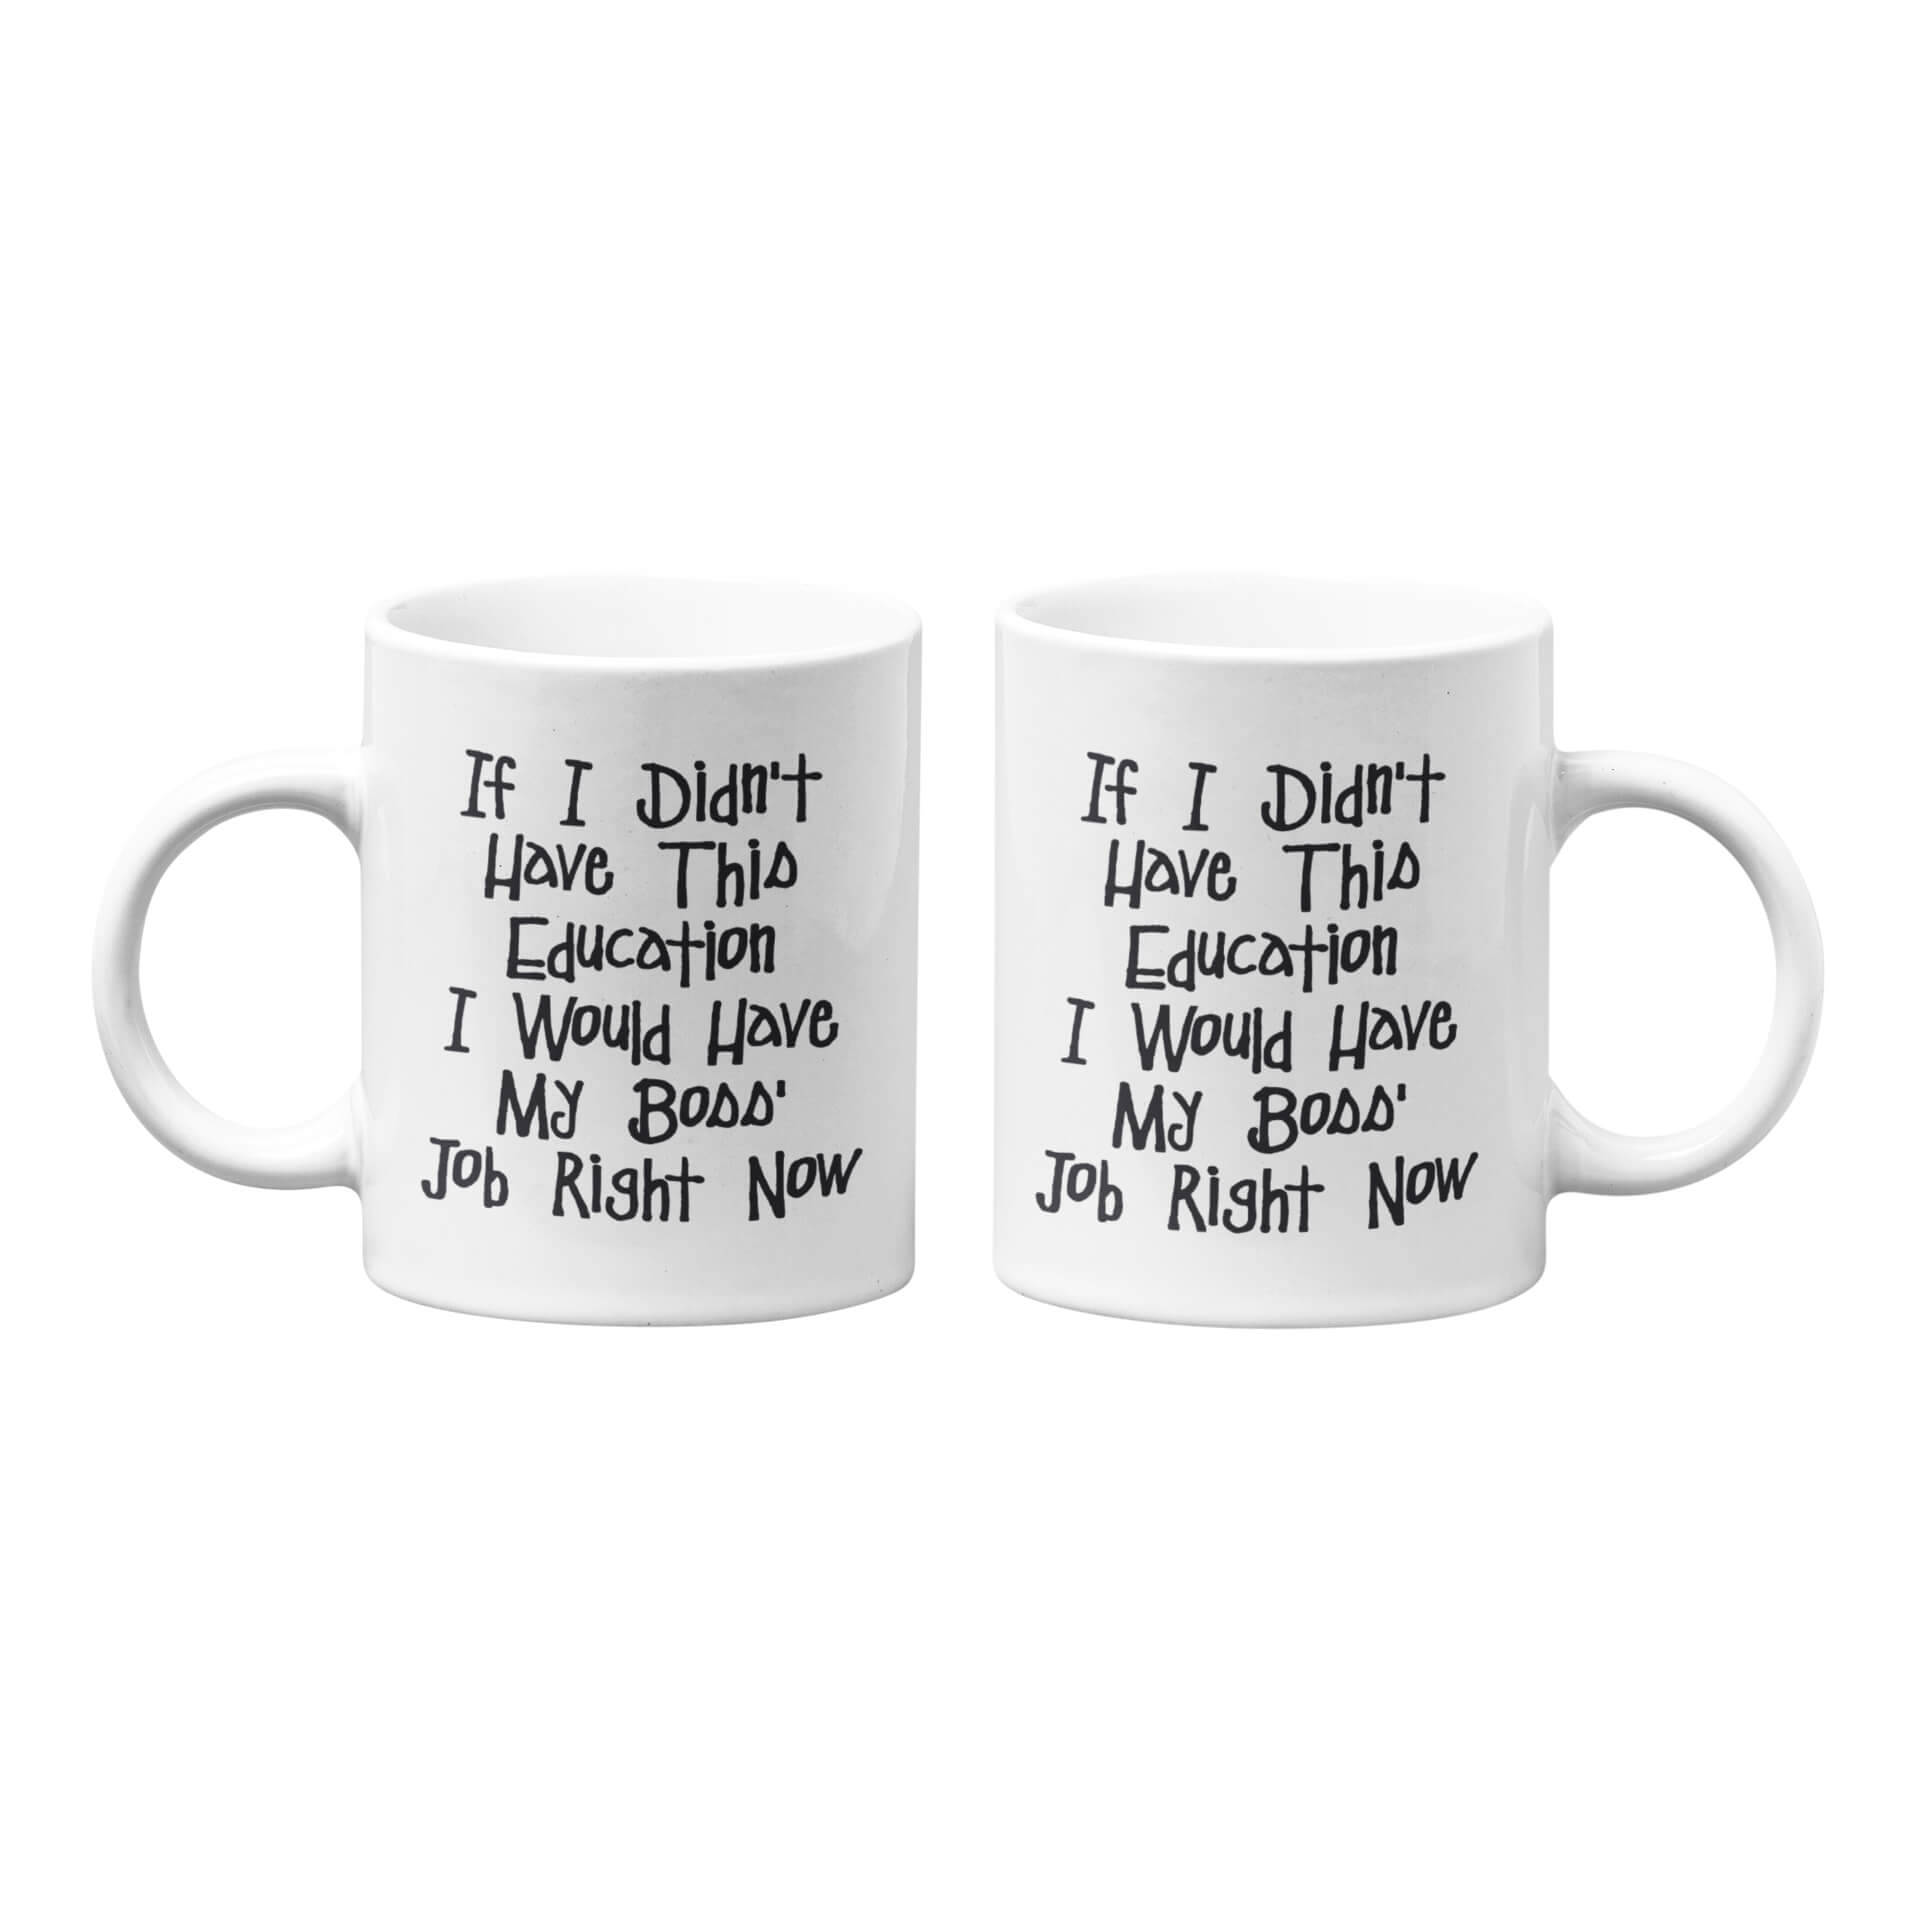 If I Didn't Have This Education I Would Have My Boss' Job Mug